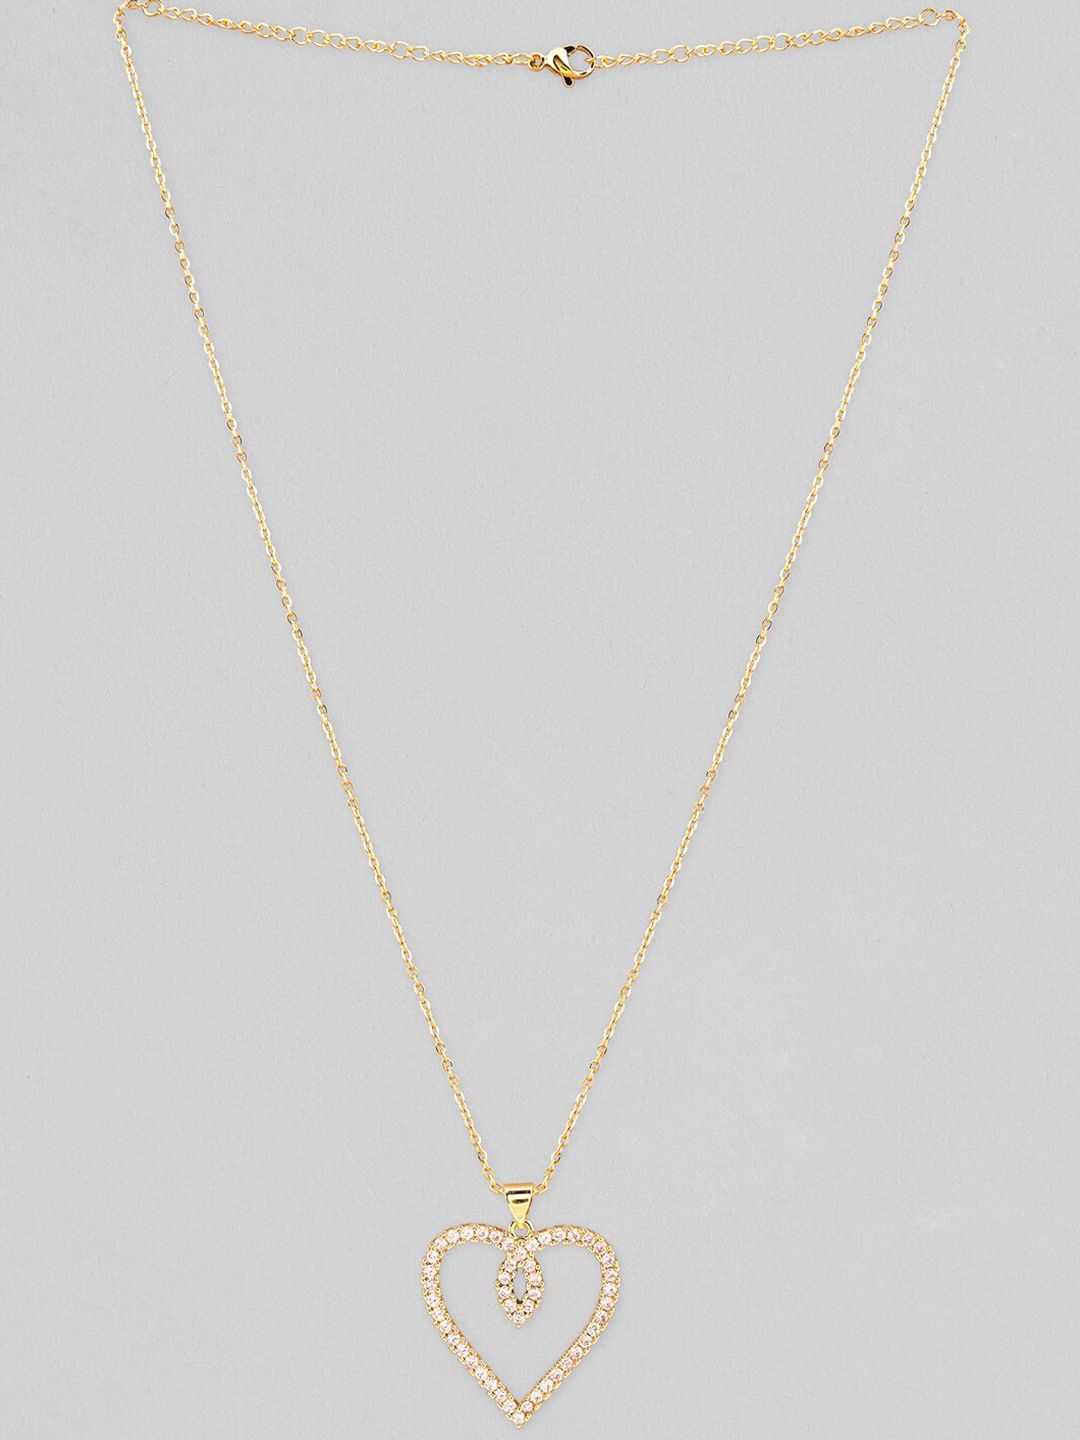 Rubans Women 22K Gold-Plated Chain Necklace With Heart Pendant Price in India